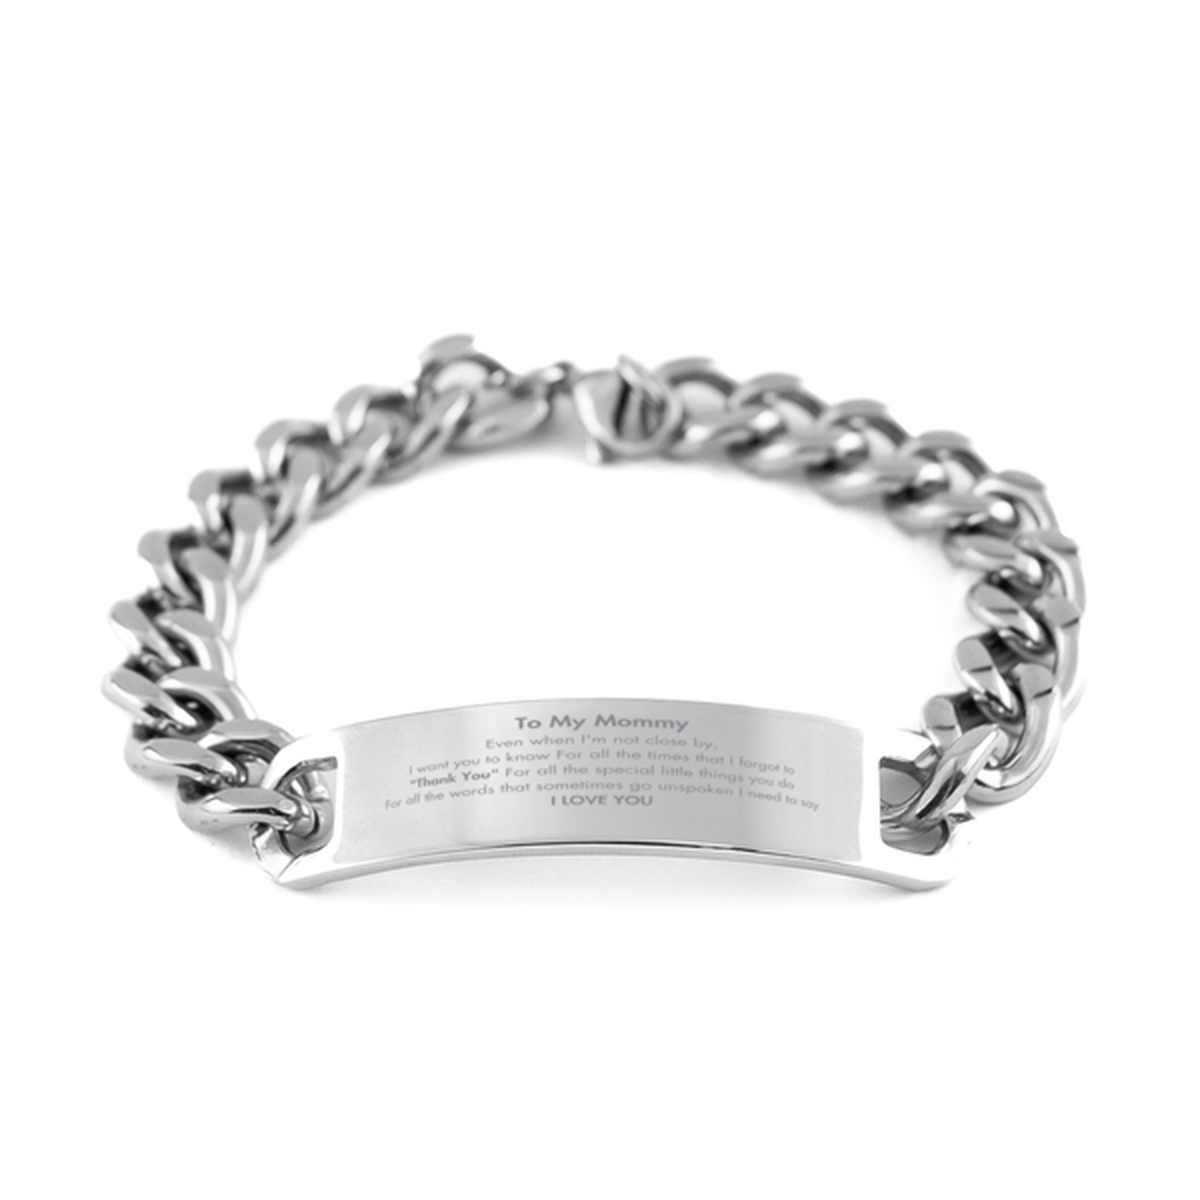 Thank You Gifts for Mommy, Keepsake Cuban Chain Stainless Steel Bracelet Gifts for Mommy Birthday Mother's day Father's Day Mommy For all the words That sometimes go unspoken I need to say I LOVE YOU